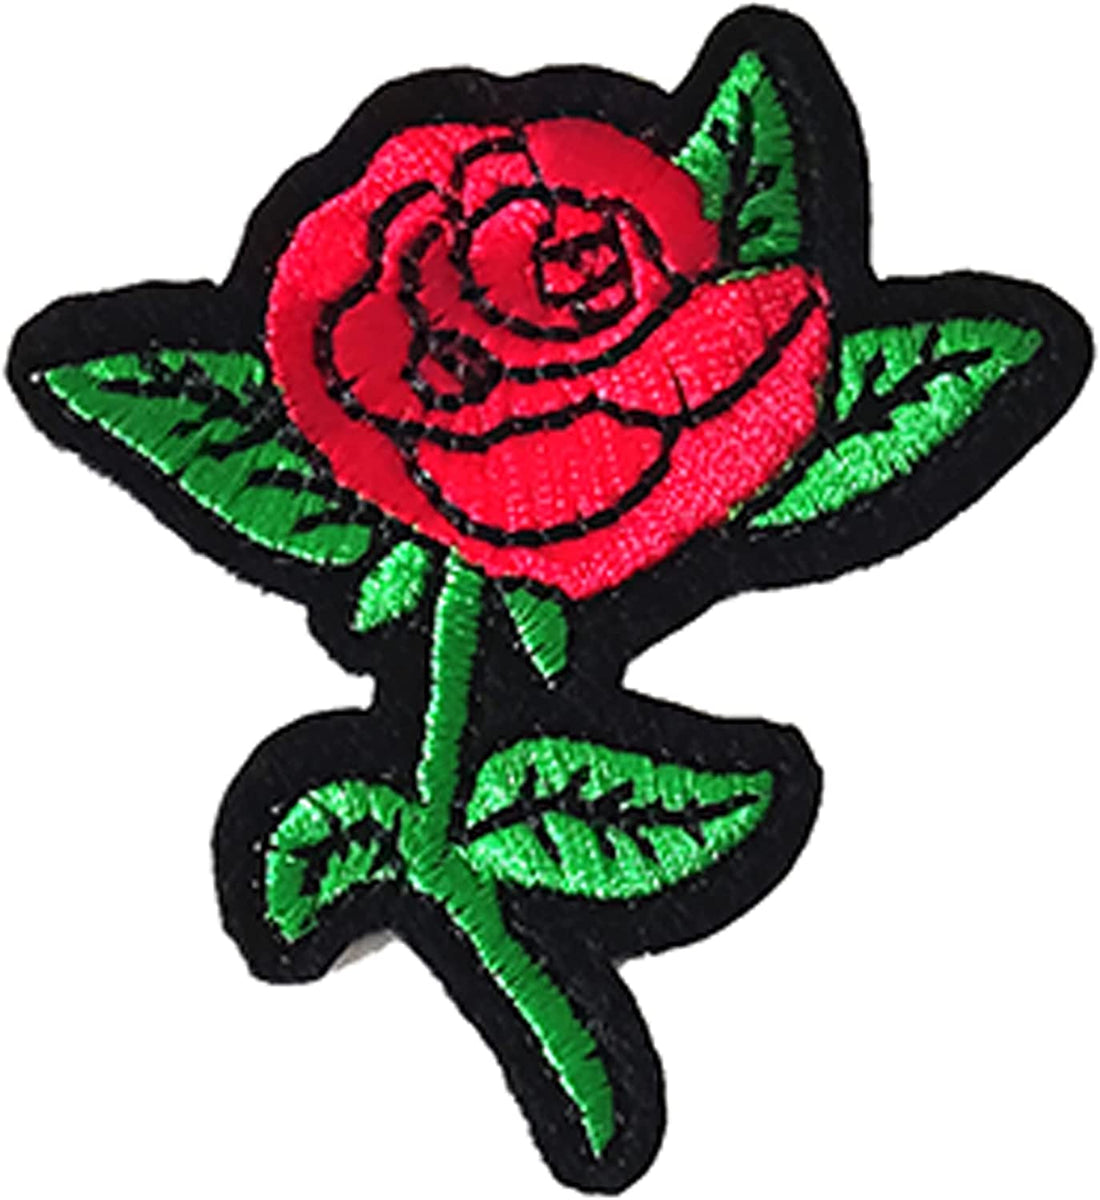 5Pcs Rose Patches Embroidered Iron on Patch for Clothes, Iron-on Patches / Sew-on Appliques Patches for Clothing, Jackets, Backpacks, Caps, Jeans